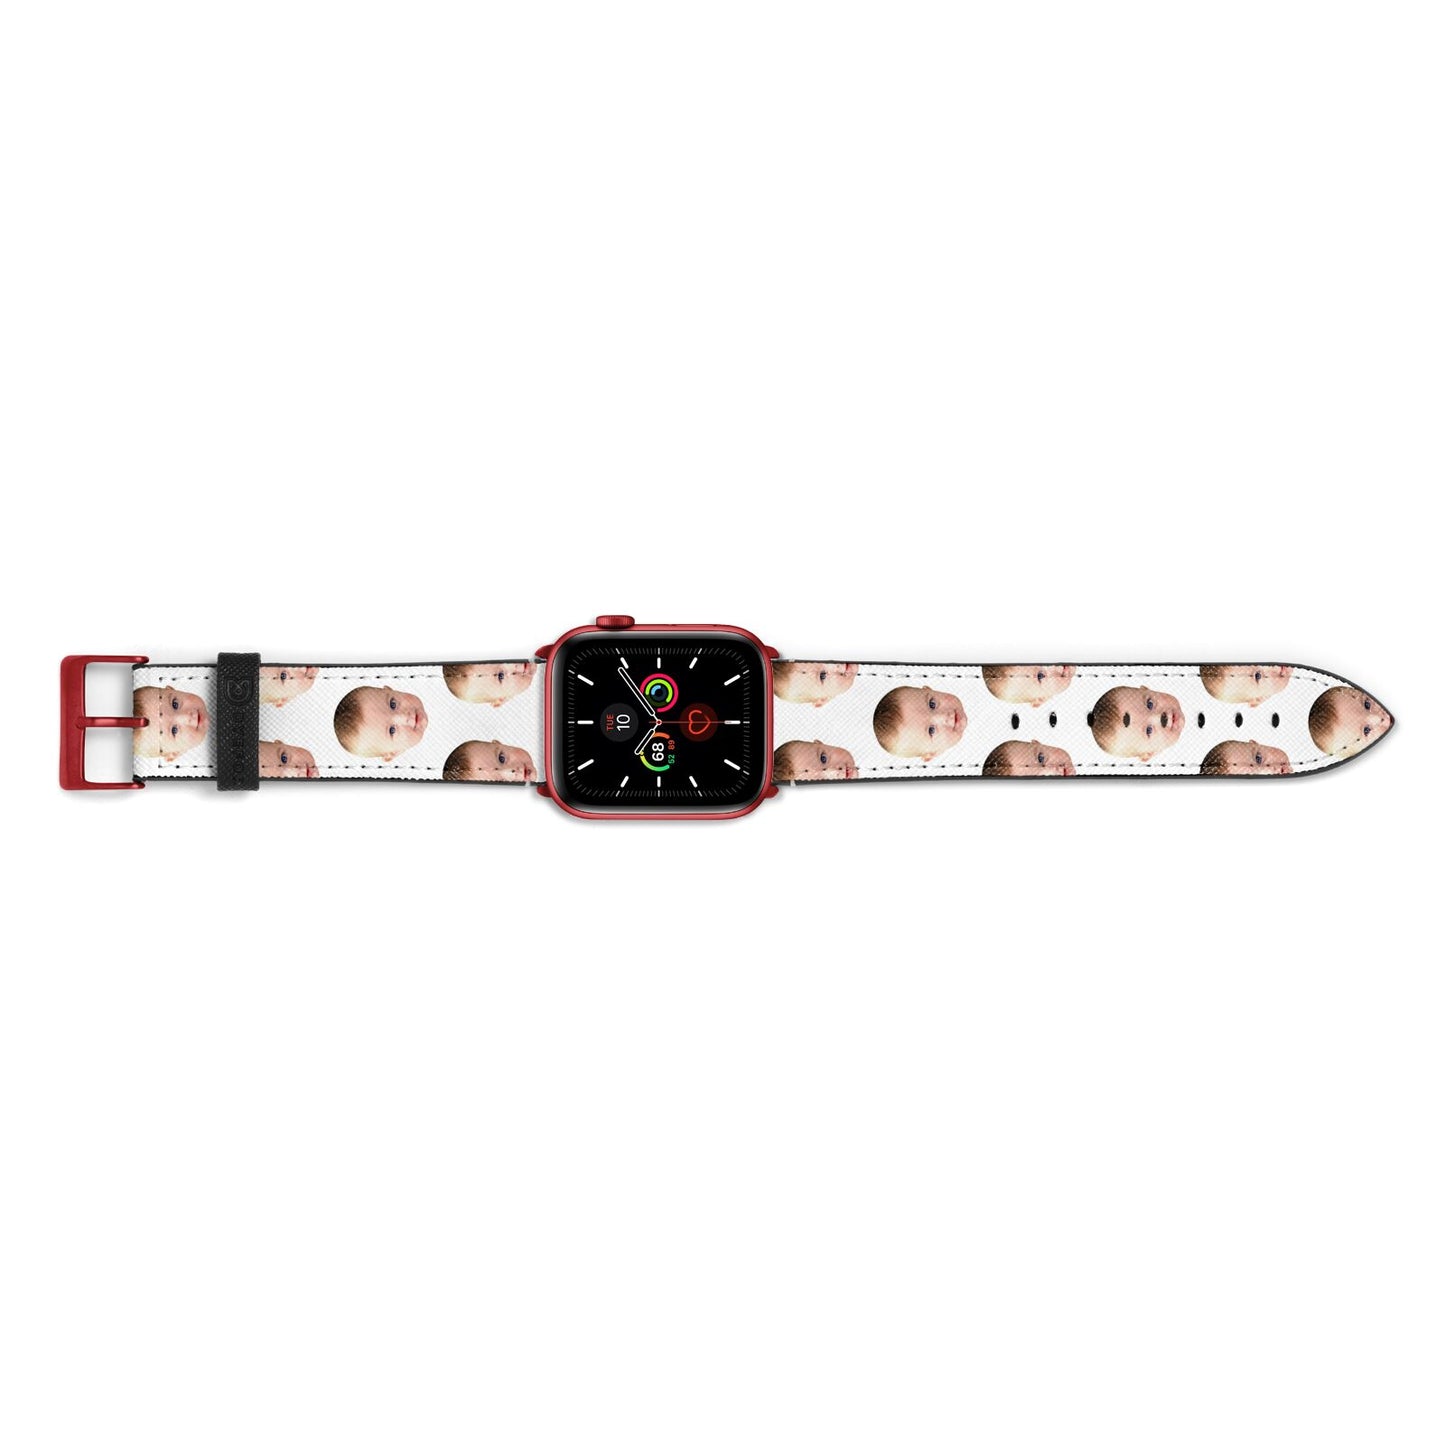 Baby Face Apple Watch Strap Landscape Image Red Hardware